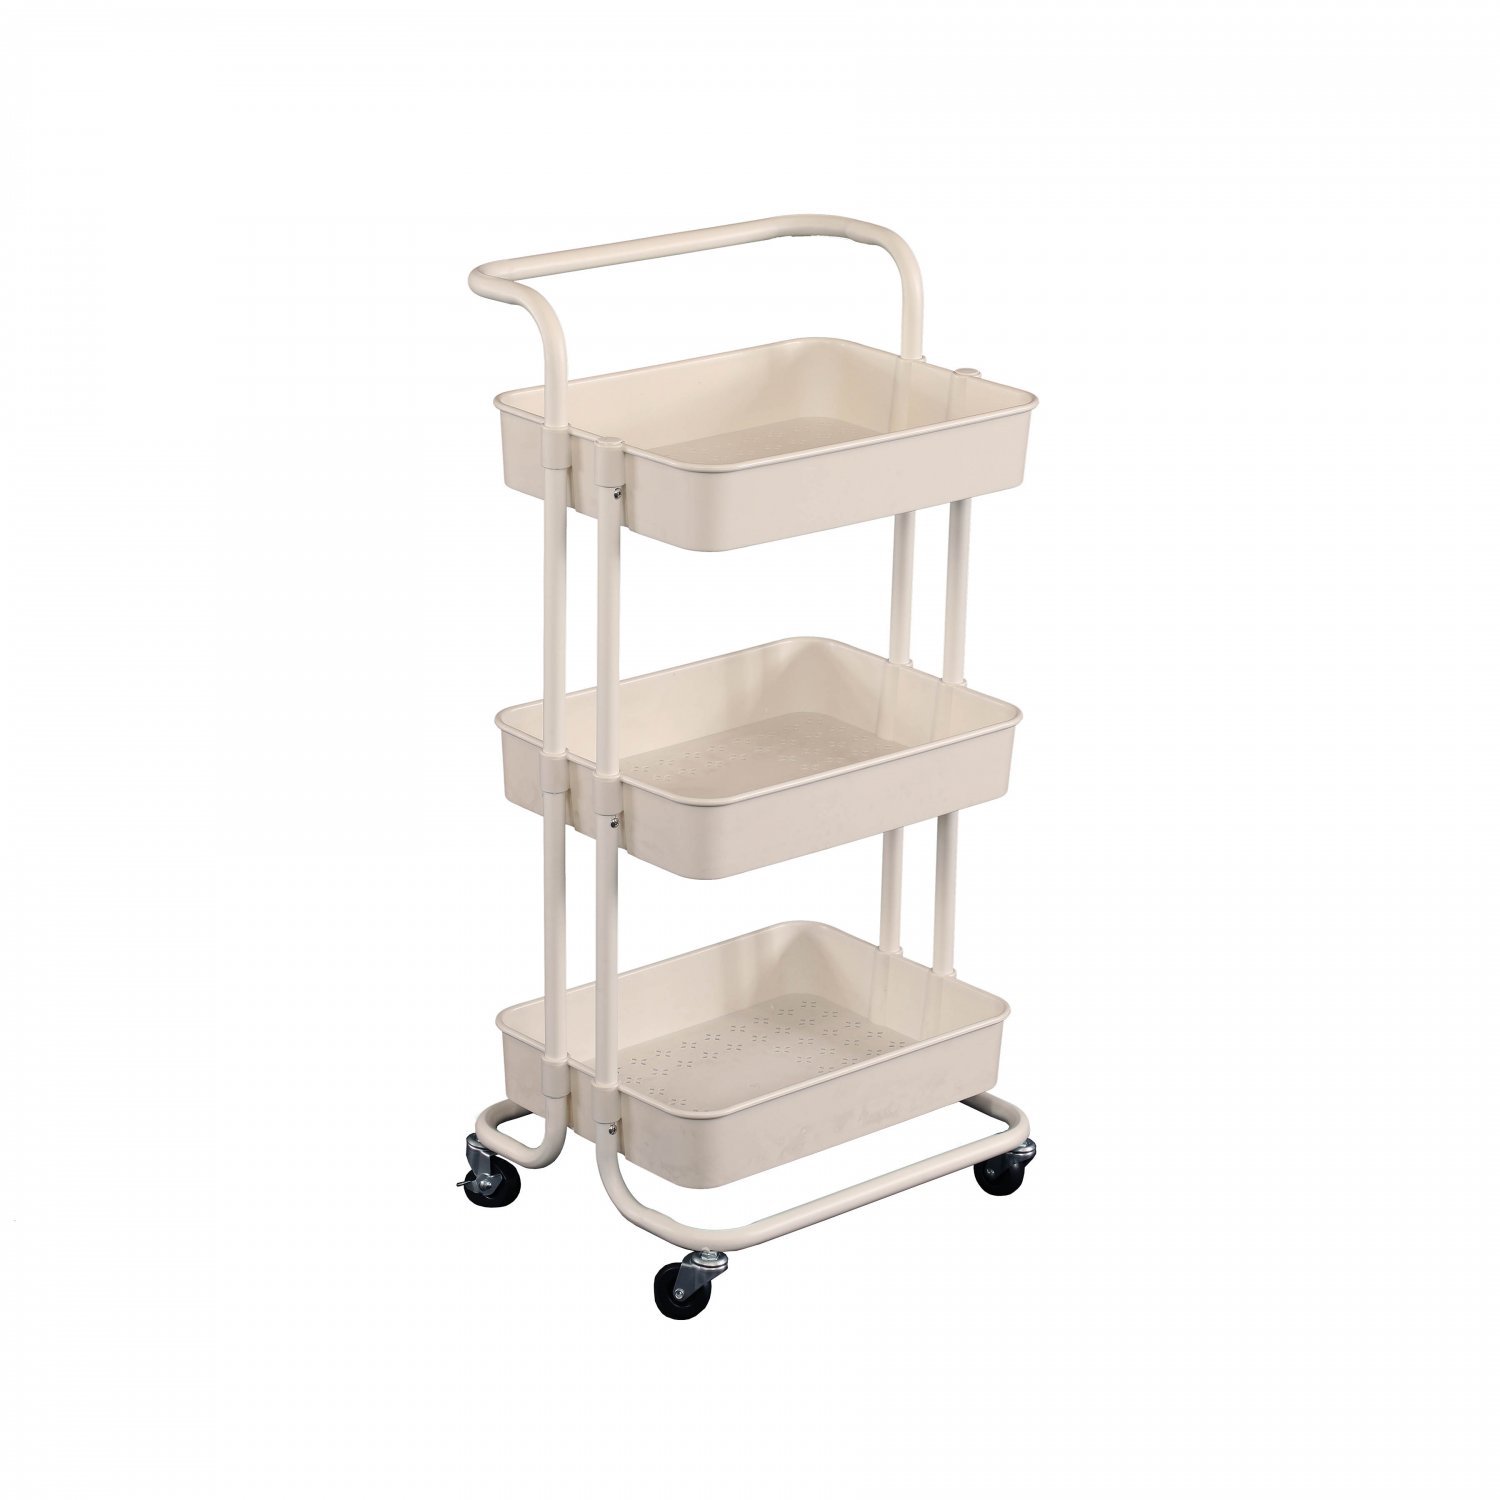 Office Pollyhb Storage Rack Serving Unit Shelves Multifunction Mobile Trolley Cart Easy Assembly for Kitchen Pantry 3-Tier Rolling Utility Cart Bathroom Bedroom Nursery Room